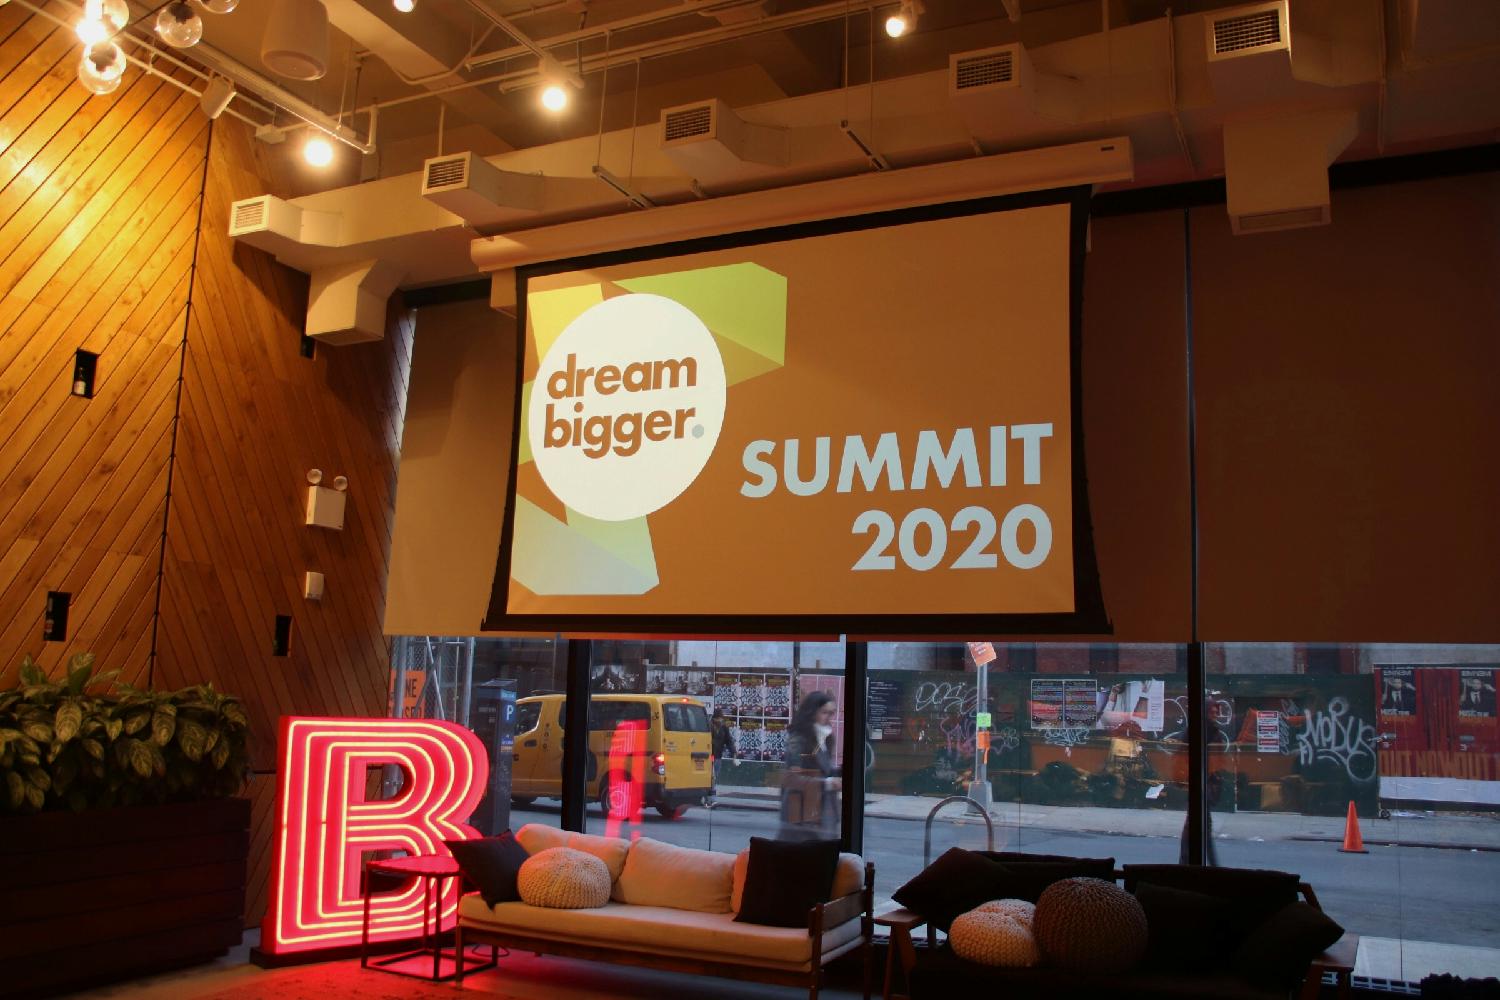 In February 2020 ZX welcomed students from around the U.S. for it's Dream Bigger Summit. 